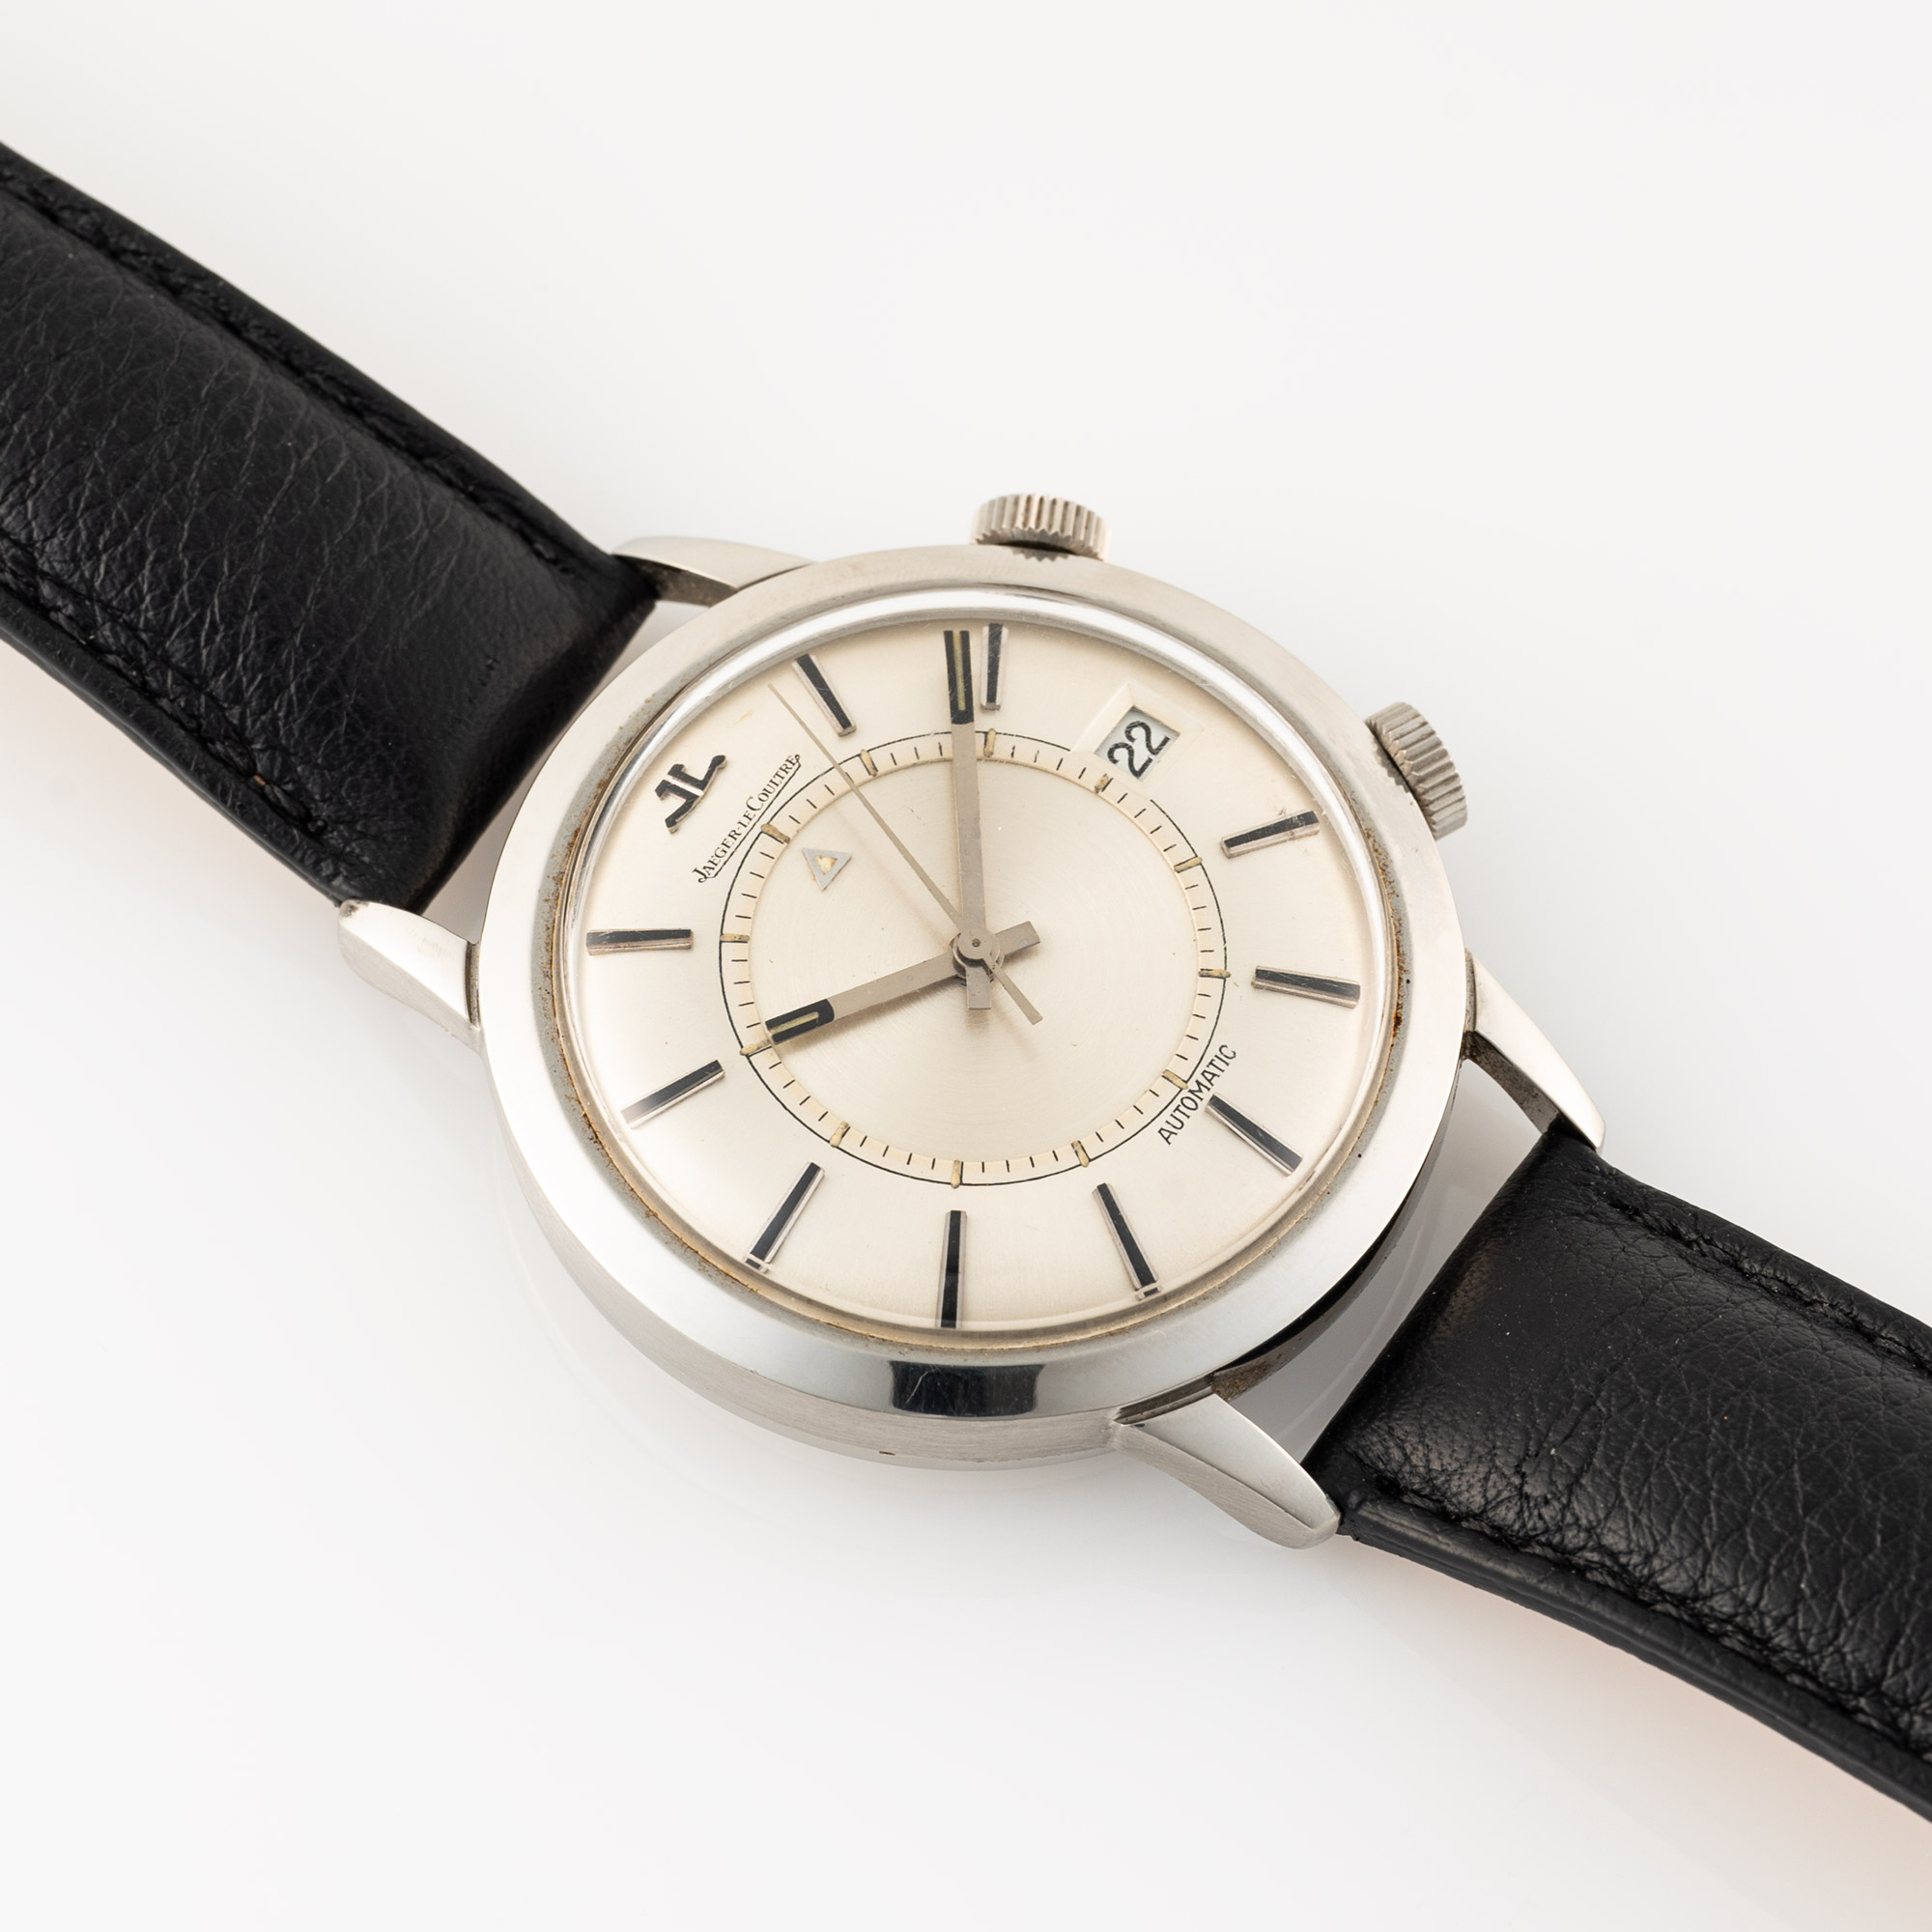 A GENTLEMAN'S SIZE STAINLESS STEEL JAEGER LECOULTRE MEMOVOX AUTOMATIC ALARM WRIST WATCH CIRCA 1960s, - Image 3 of 7